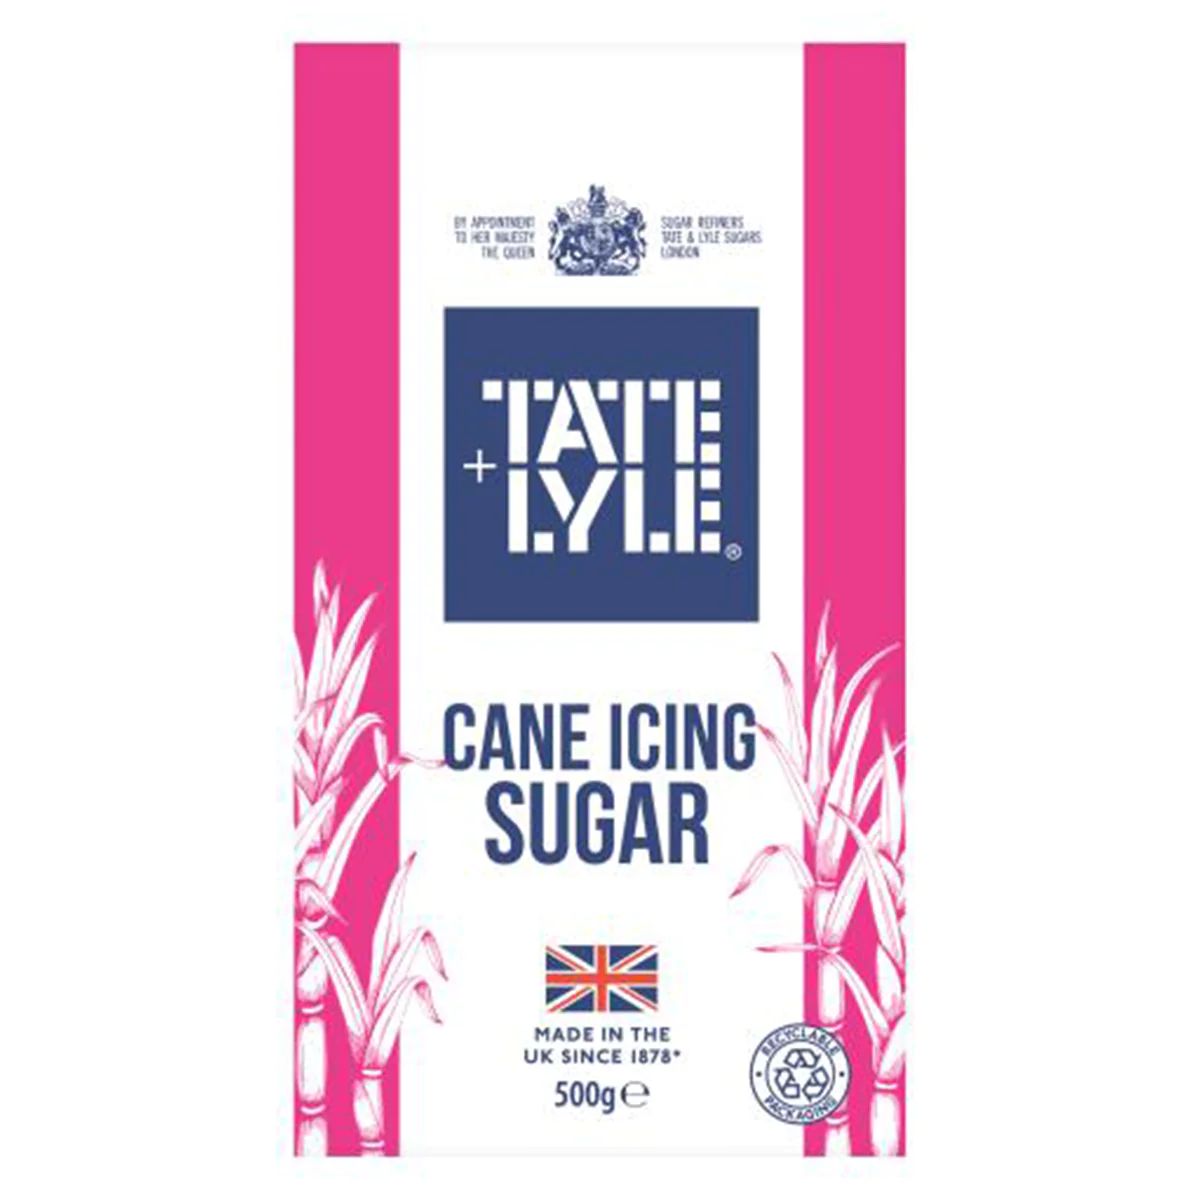 A package of Tate & Lyle Cane Icing Sugar, produced in the uk since 1878, weighing 500 grams.